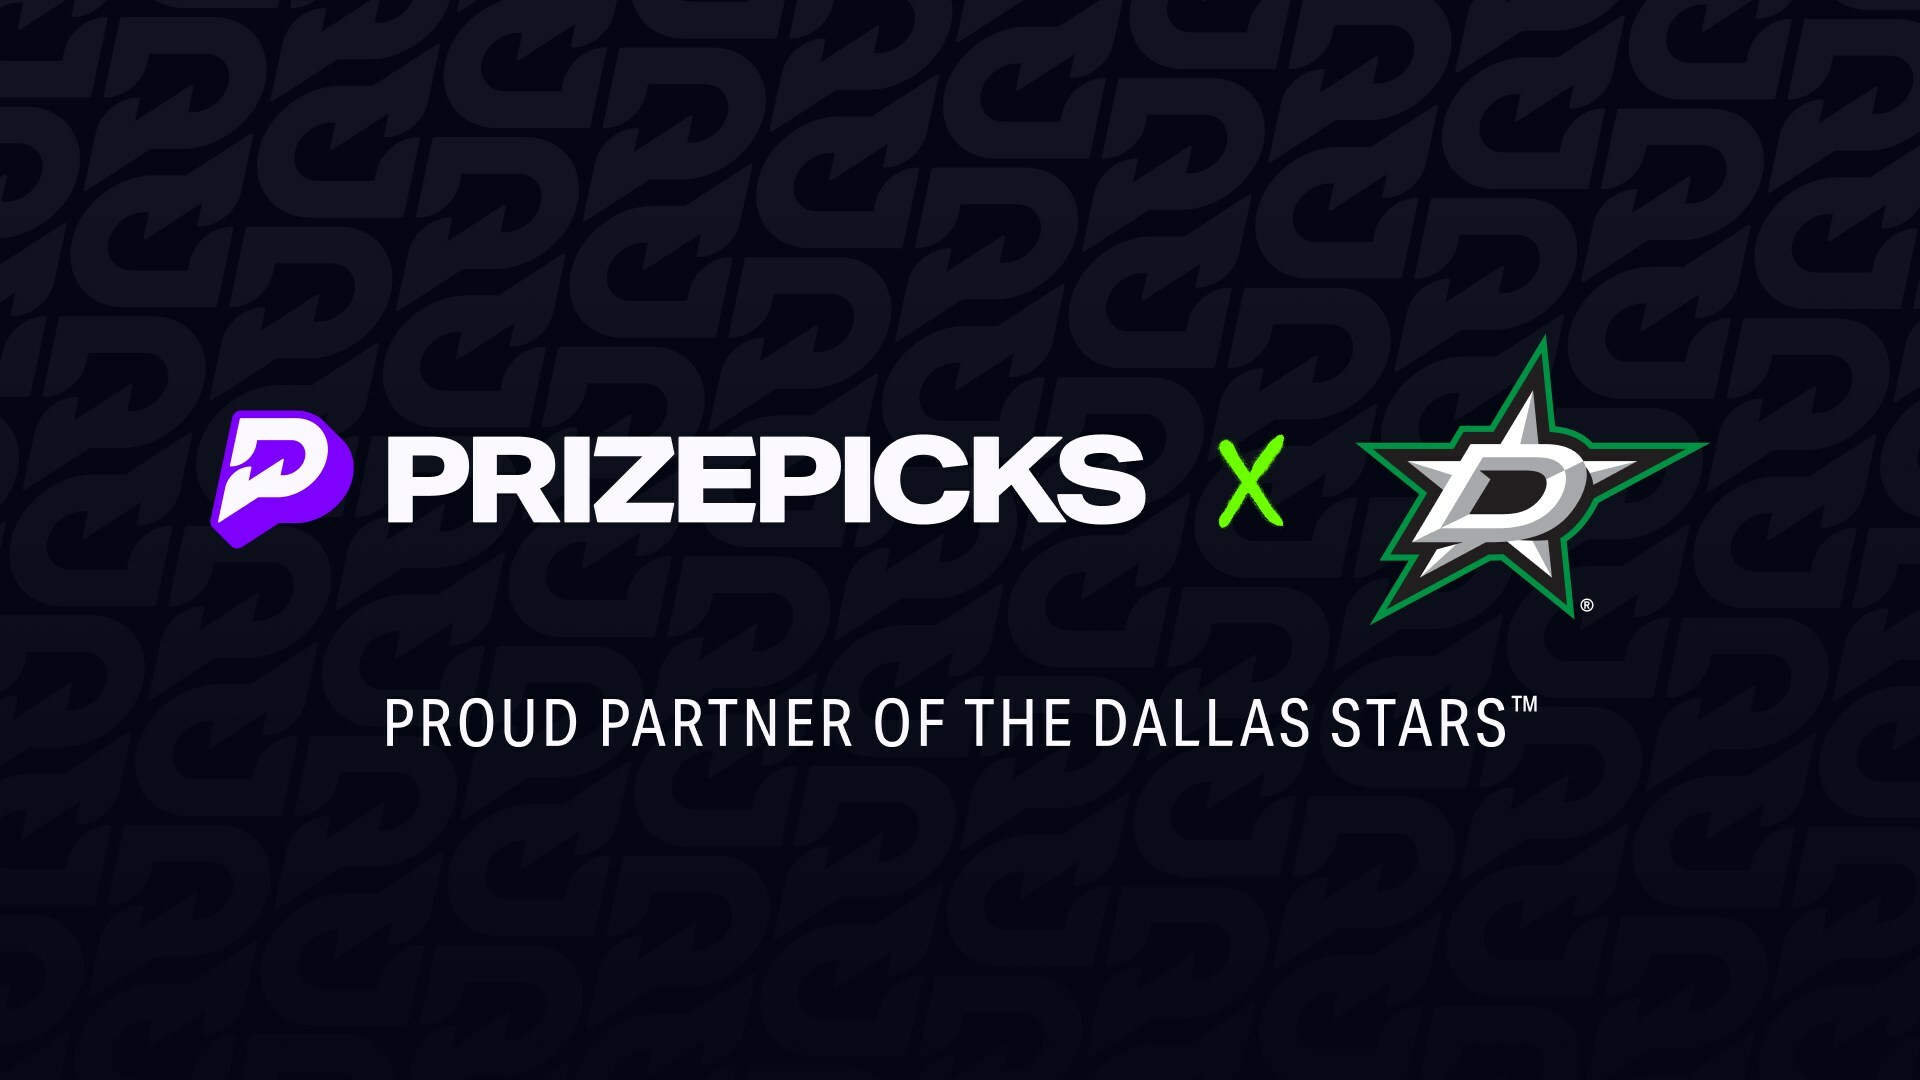 PrizePicks announces a new partnership with the Dallas Stars, marking an exciting collaboration between the two organizations.